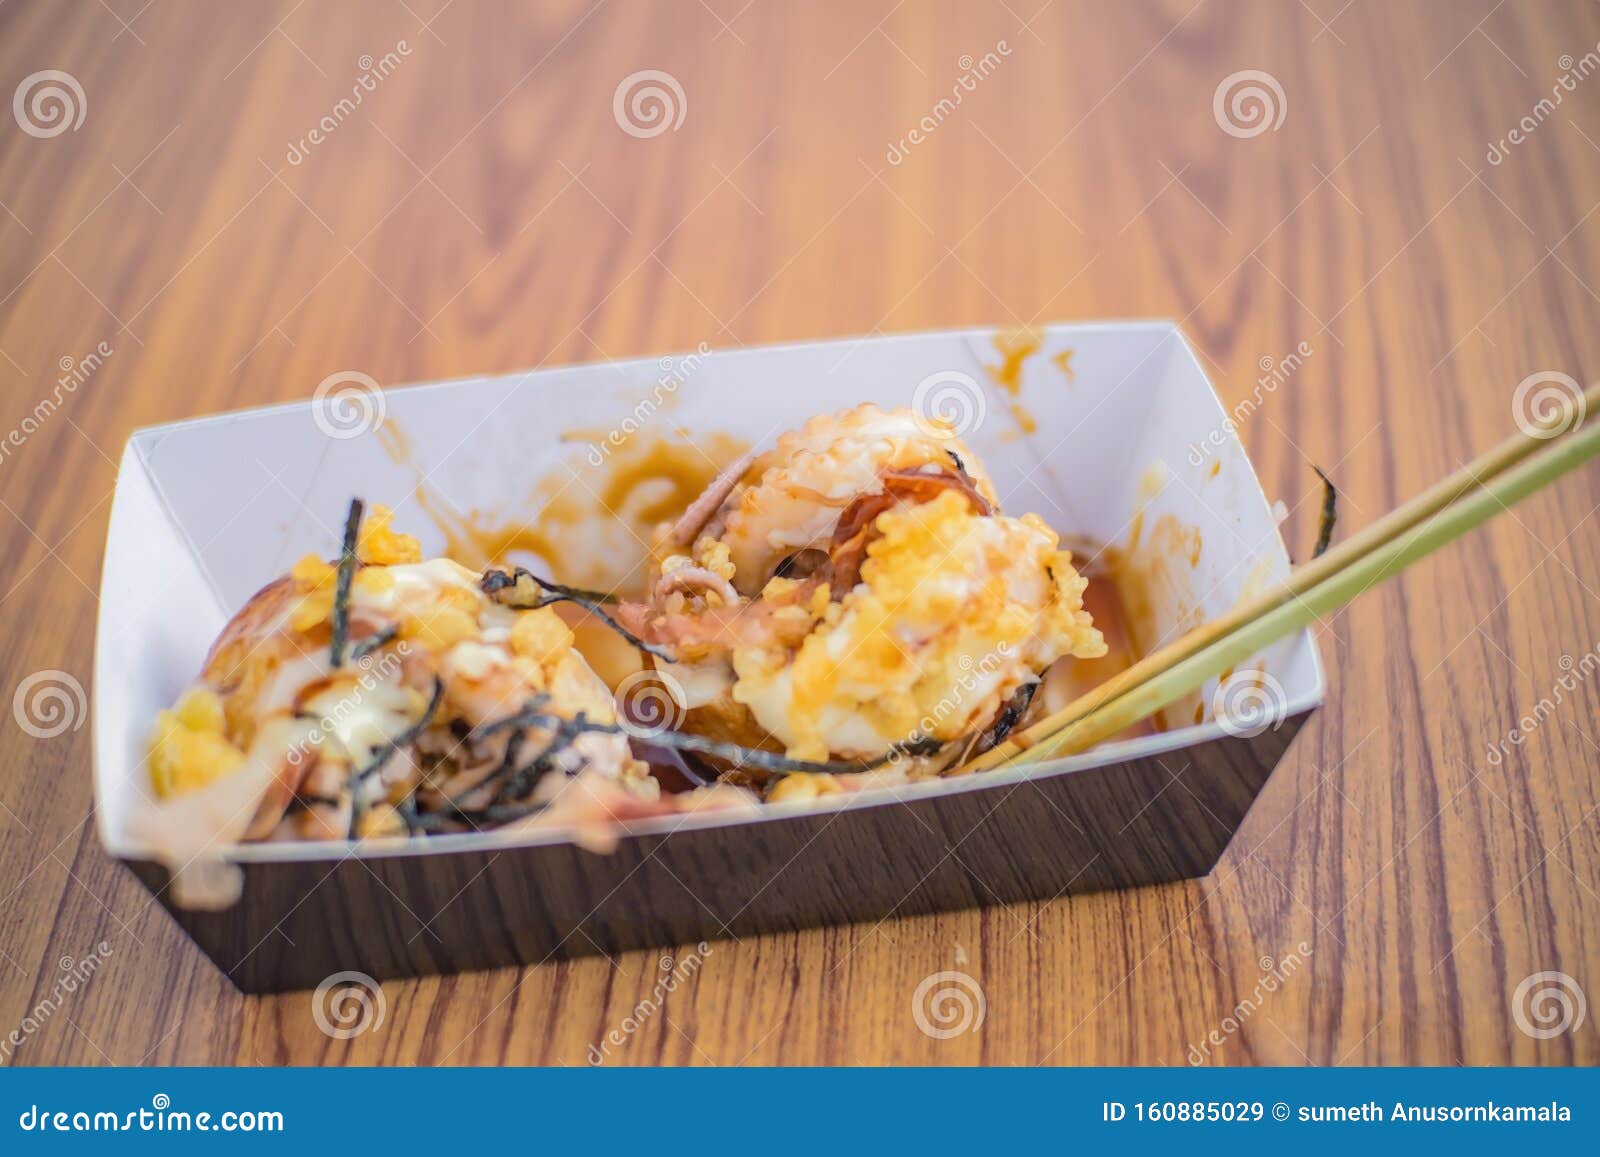 Giant Octopus Takoyaki Cooking On Tako Stove Stock Image Image Of Nature Brown 160885029,How To Cook Carrots Healthy